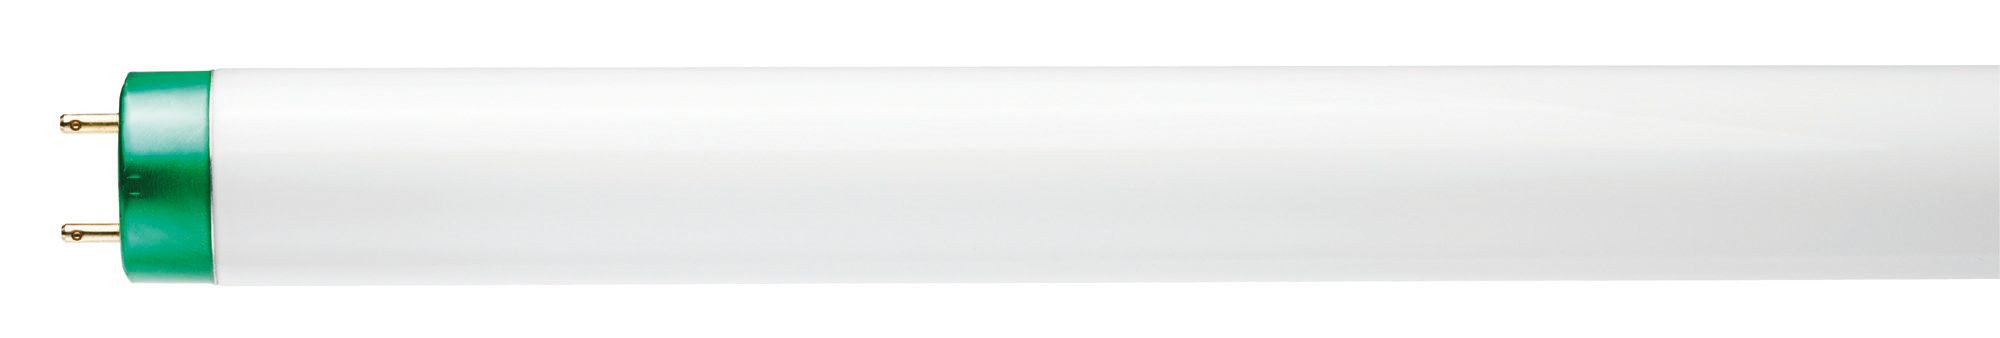 433978 Linear Fluorescent Lamp Philips Lighting;Signify Lamps